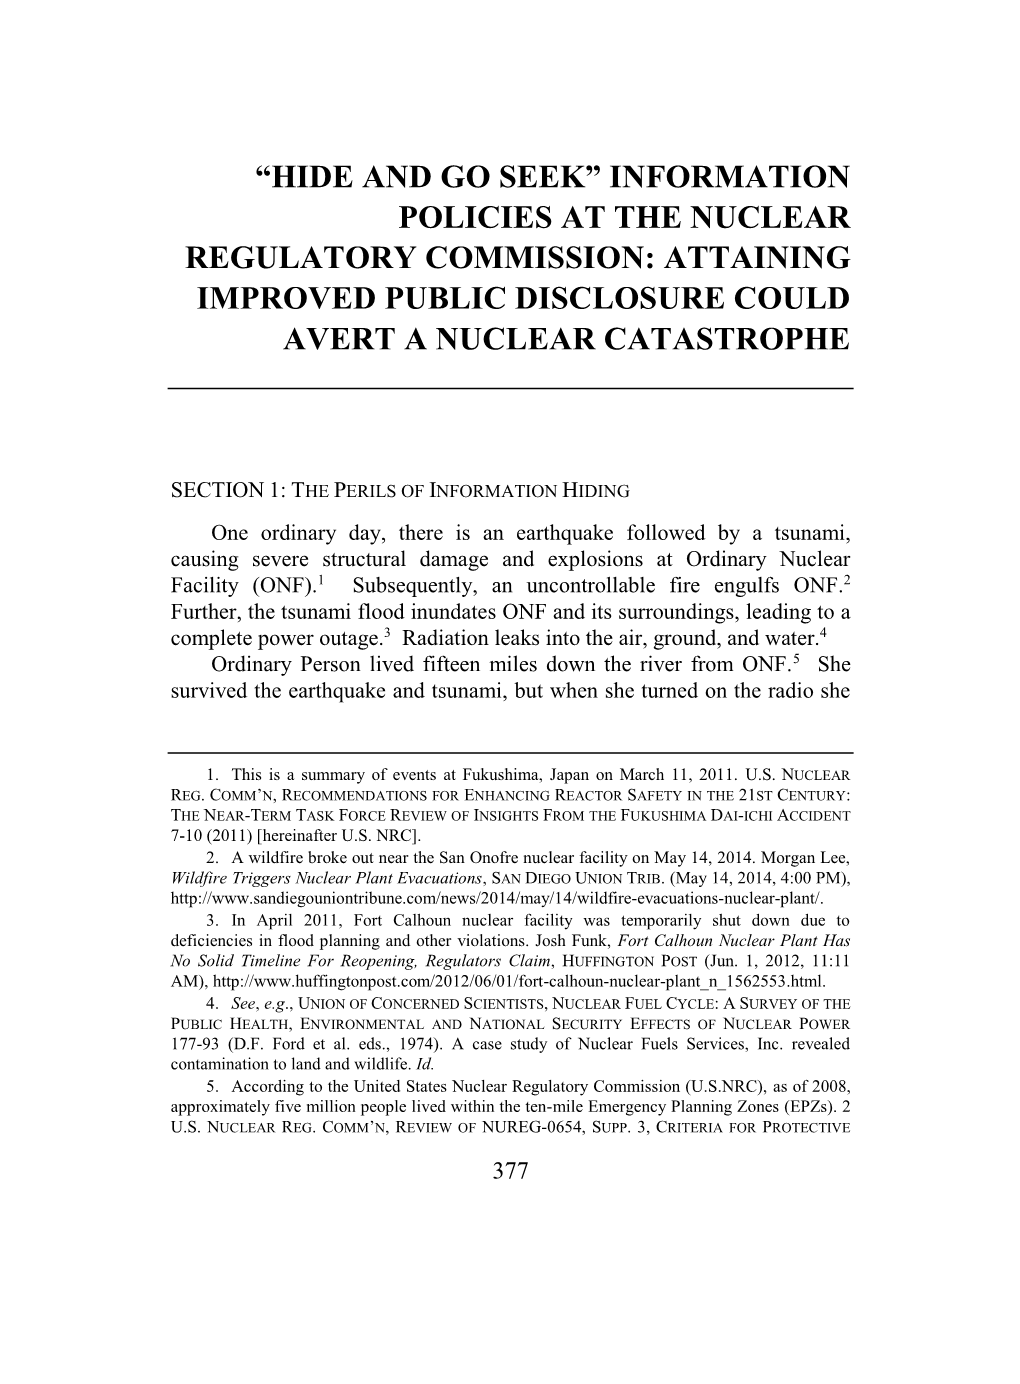 “Hide and Go Seek” Information Policies at the Nuclear Regulatory Commission: Attaining Improved Public Disclosure Could Avert a Nuclear Catastrophe